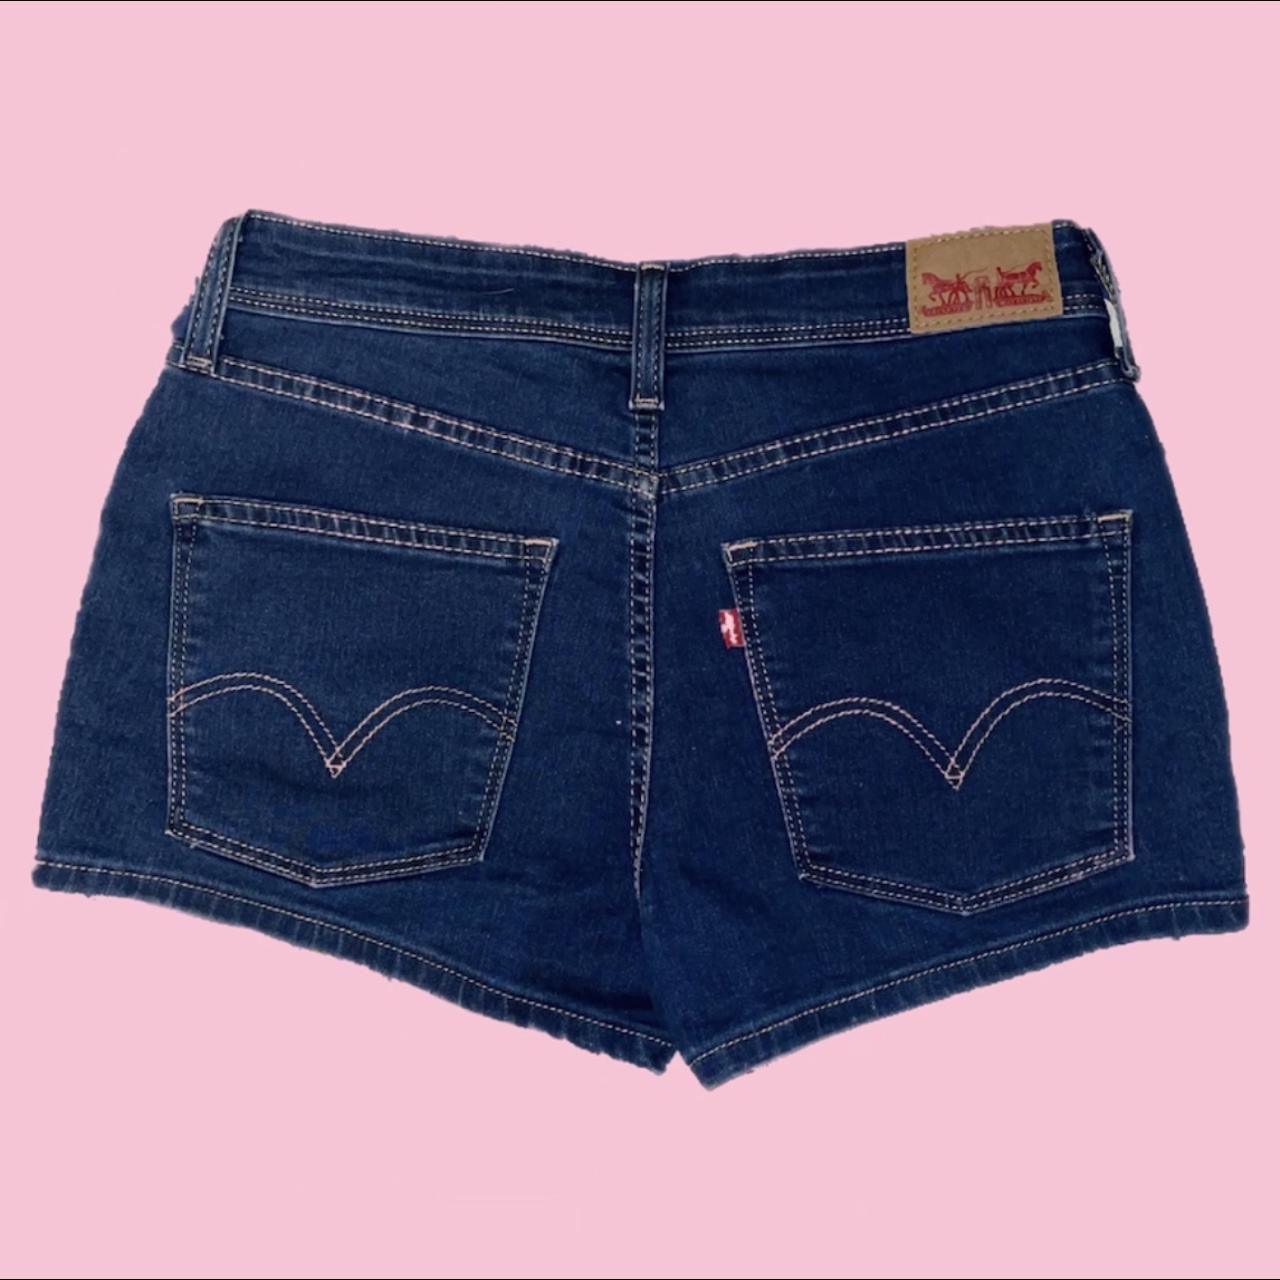 Levi's Women's Navy and Blue Shorts